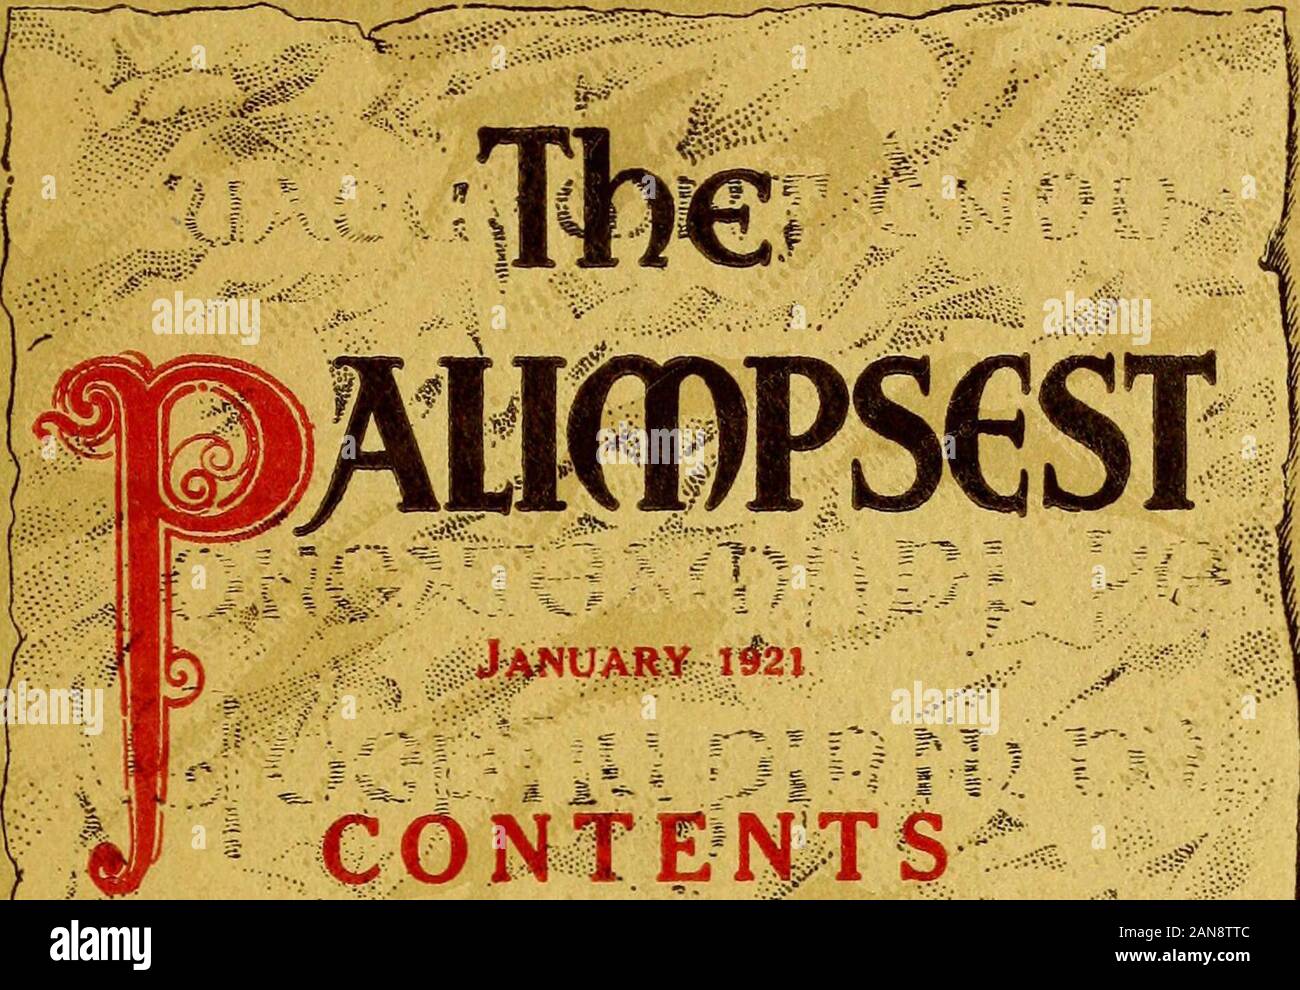 The Palimpsest . Gallaher 178 The Pacific City Fight Donald L. McMurry 182 Comment by the Editor 190 Number 7 — July 1921 Amana Bertha M. H. Shambaugh 193 Comment by the Editor 229 CONTENTS VNumber 8 — August 1921 Perils of a Pioneer Editor John C. Parish 233 The Coming of the Railroad Sarah Ellen Graves 240 A River Trip in 1833 Charles J. Latrobe 244 Comment by the Editor 264 Number 9 — September 1921 The Cardiff Giant Pikes Hill Magnolia Comment by the Editor Ruth A. Gallaher 269 Bruce E. Mahan 282 Blanche C. Sly 290 298 Number 10 — October 1921 The Way to IowaFrom New York to IowaA Study in Stock Photo